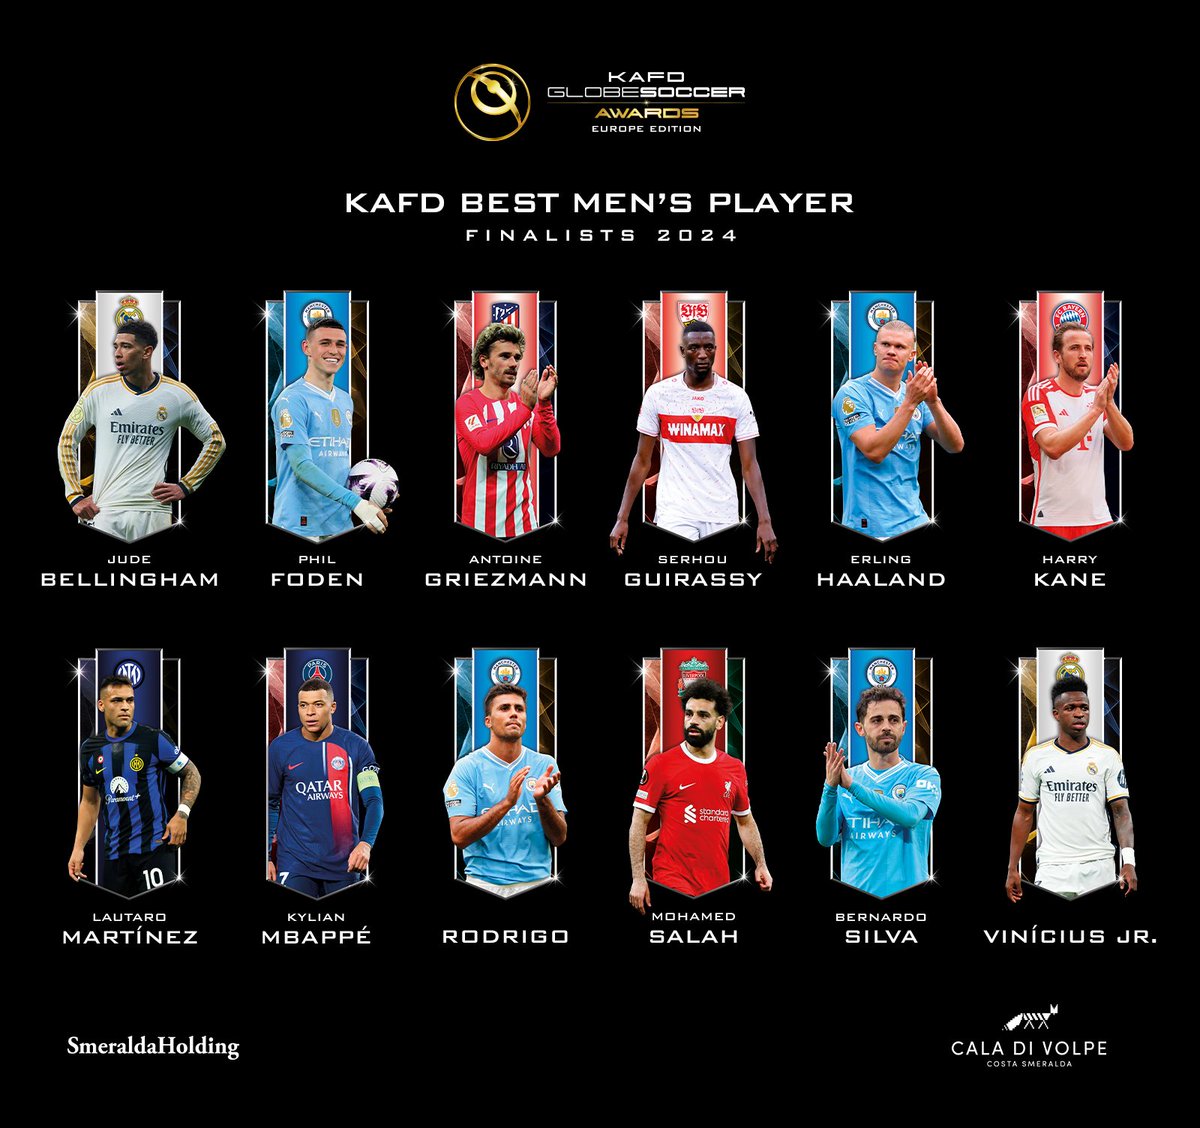 👑 Who will be crowned @KAFD BEST MEN'S PLAYER? 🏆

Join us on May 28, 2024, at the KAFD #GlobeSoccer Awards Europe Edition gala in Sardinia, Italy, to find out who will be named the KAFD BEST MEN'S PLAYER!

#KAFD #HotelCaladiVolpe #SmeraldaHolding